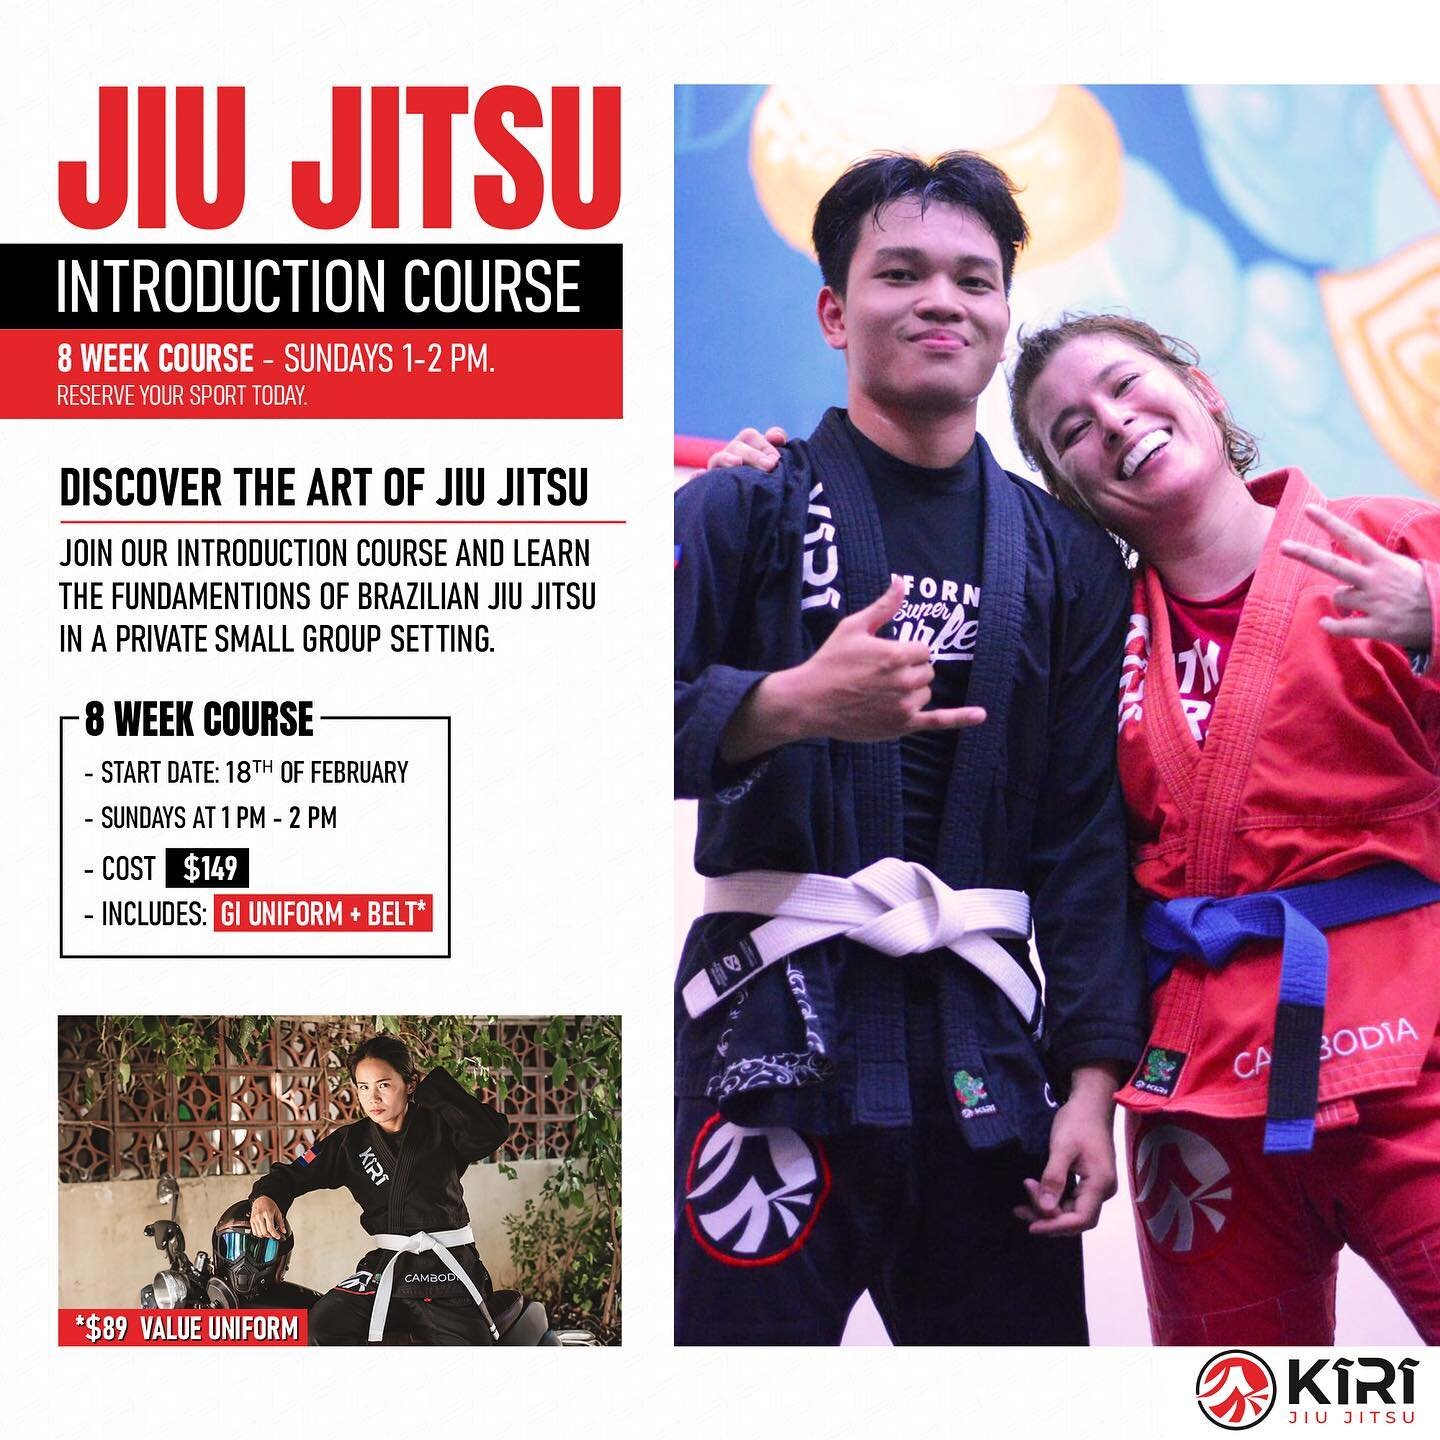 🥋 Ready to discover the art of Jiu Jitsu? Join our 𝟴-𝘄𝗲𝗲𝗸 𝗶𝗻𝘁𝗿𝗼𝗱𝘂𝗰𝘁𝗶𝗼𝗻 𝗰𝗼𝘂𝗿𝘀𝗲 and learn the fundamentals in a small group setting.

🤼 In this beginner-friendly 8-week program, you&rsquo;ll:
✅ Learn vital Jiu Jitsu techniques.